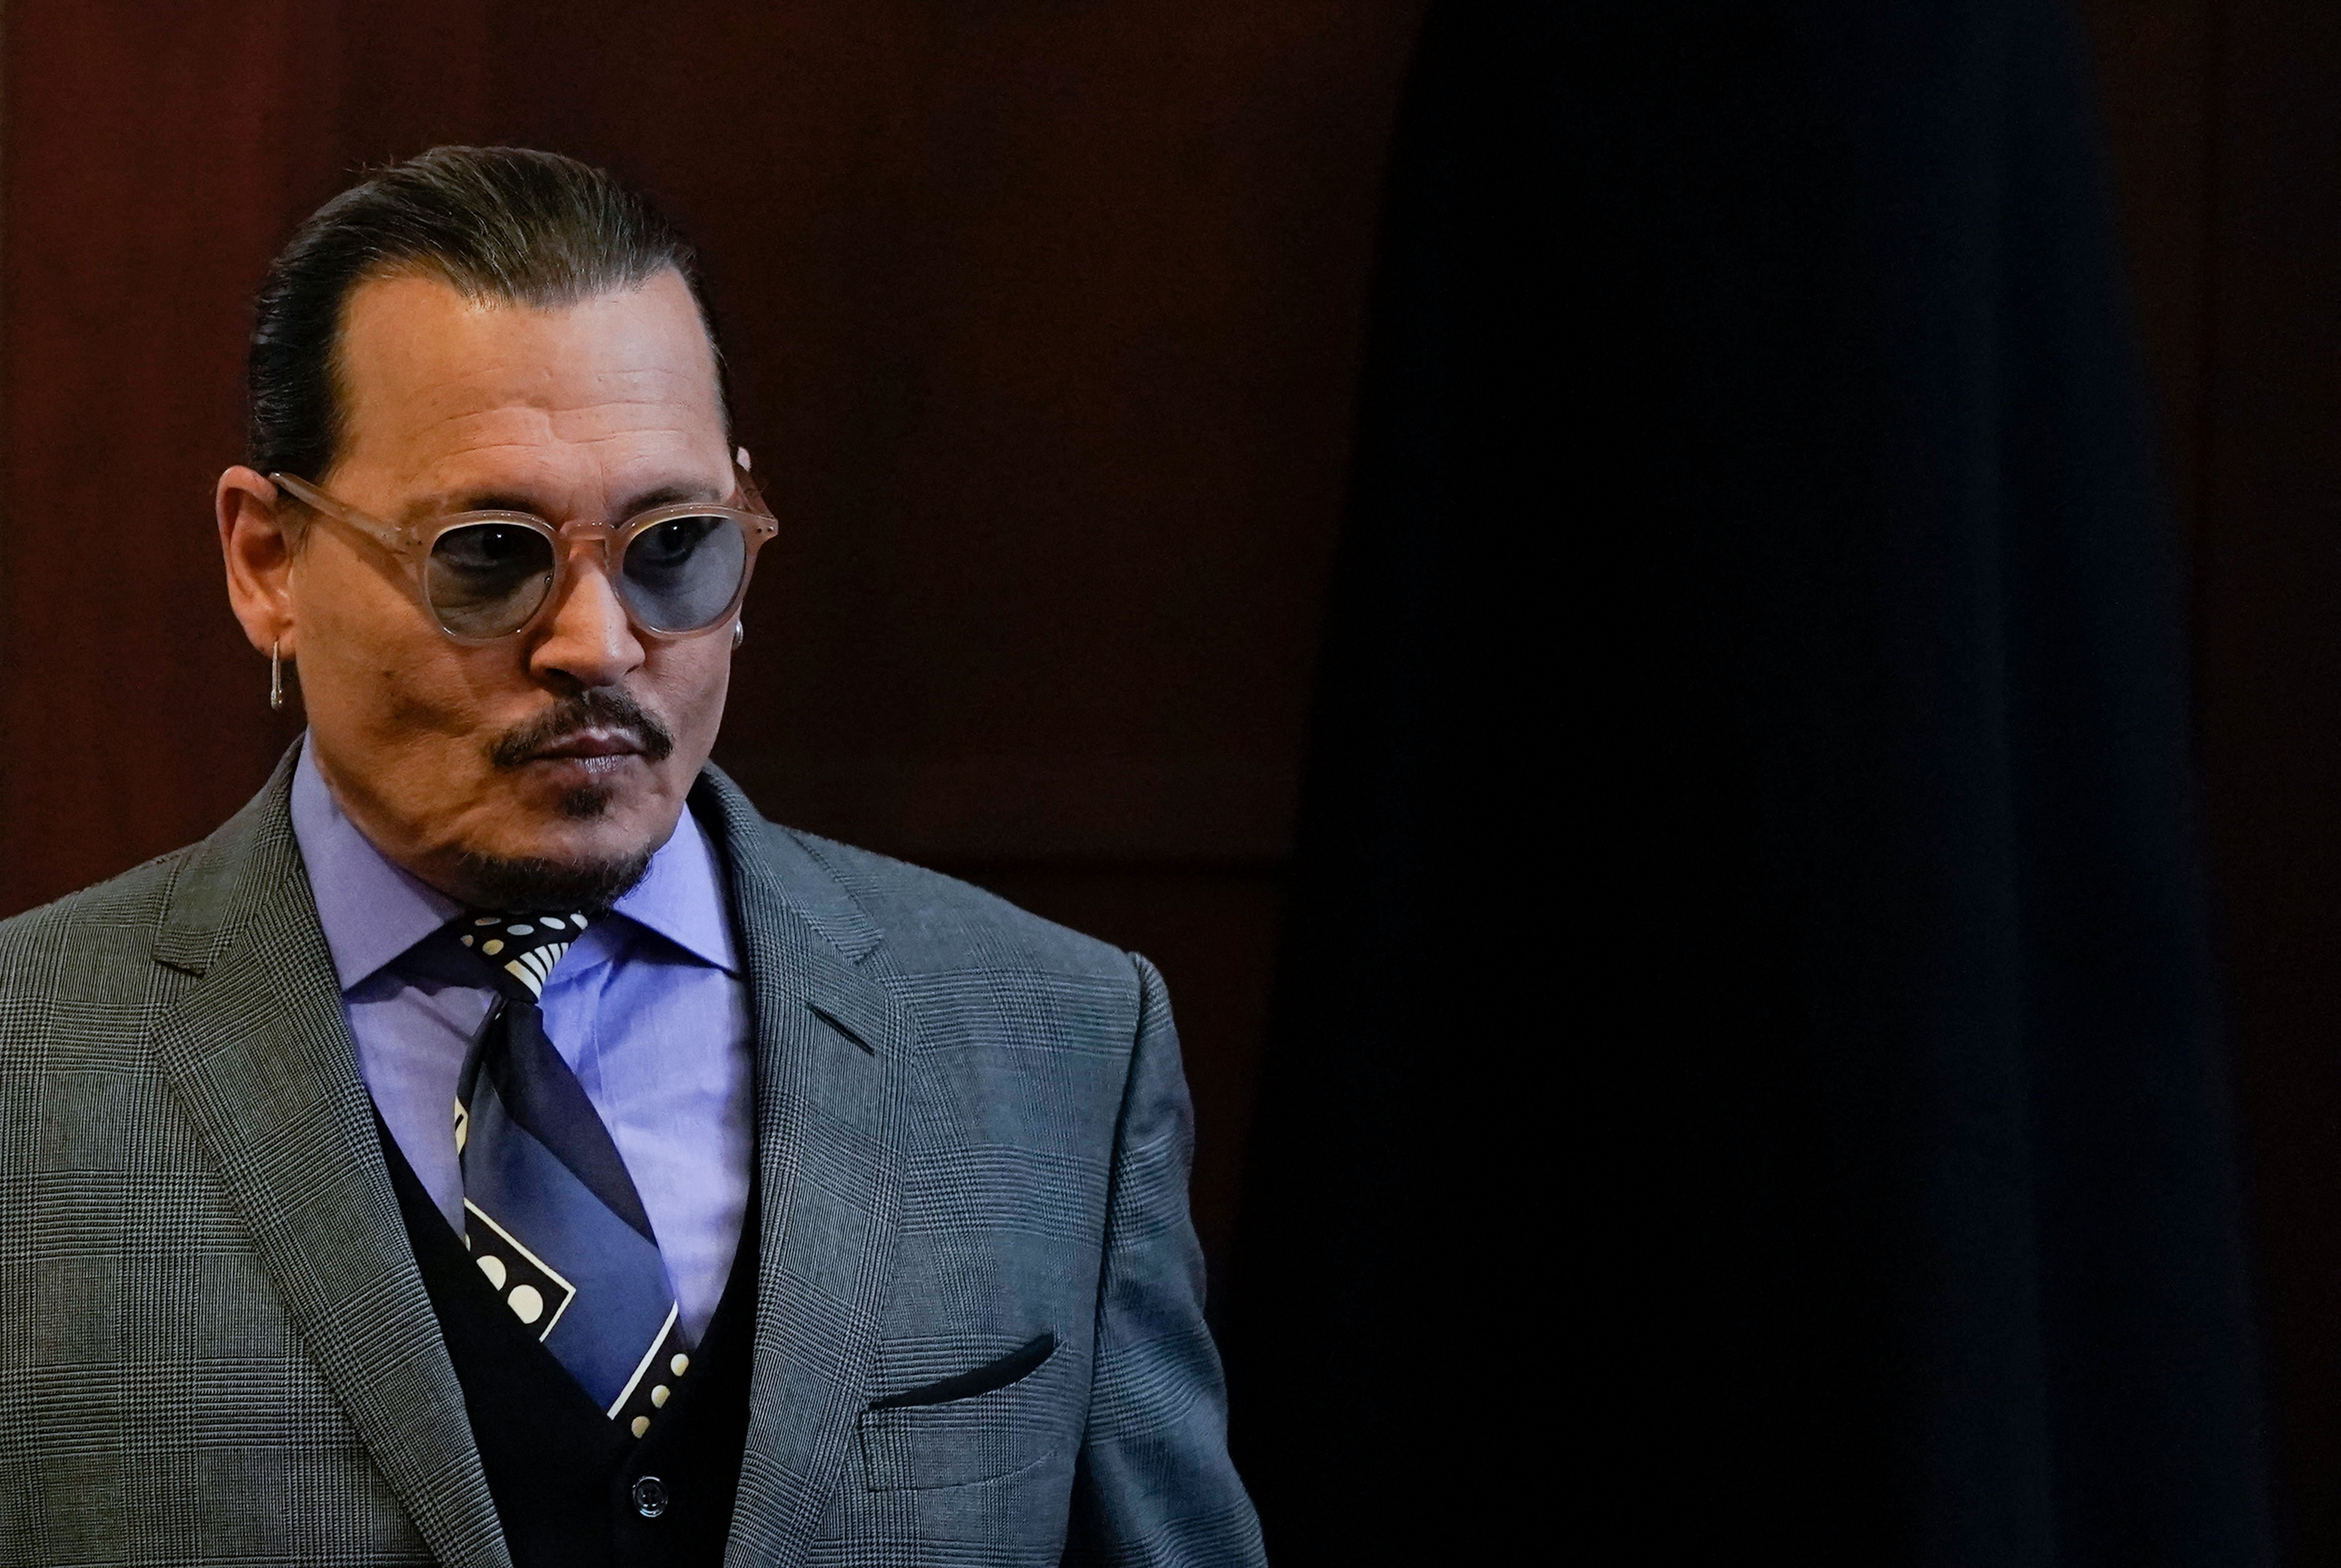 Johnny Depp at the Fairfax County Circuit Court in Fairfax, Virginia, on May 4, 2022. | Source: Getty Images